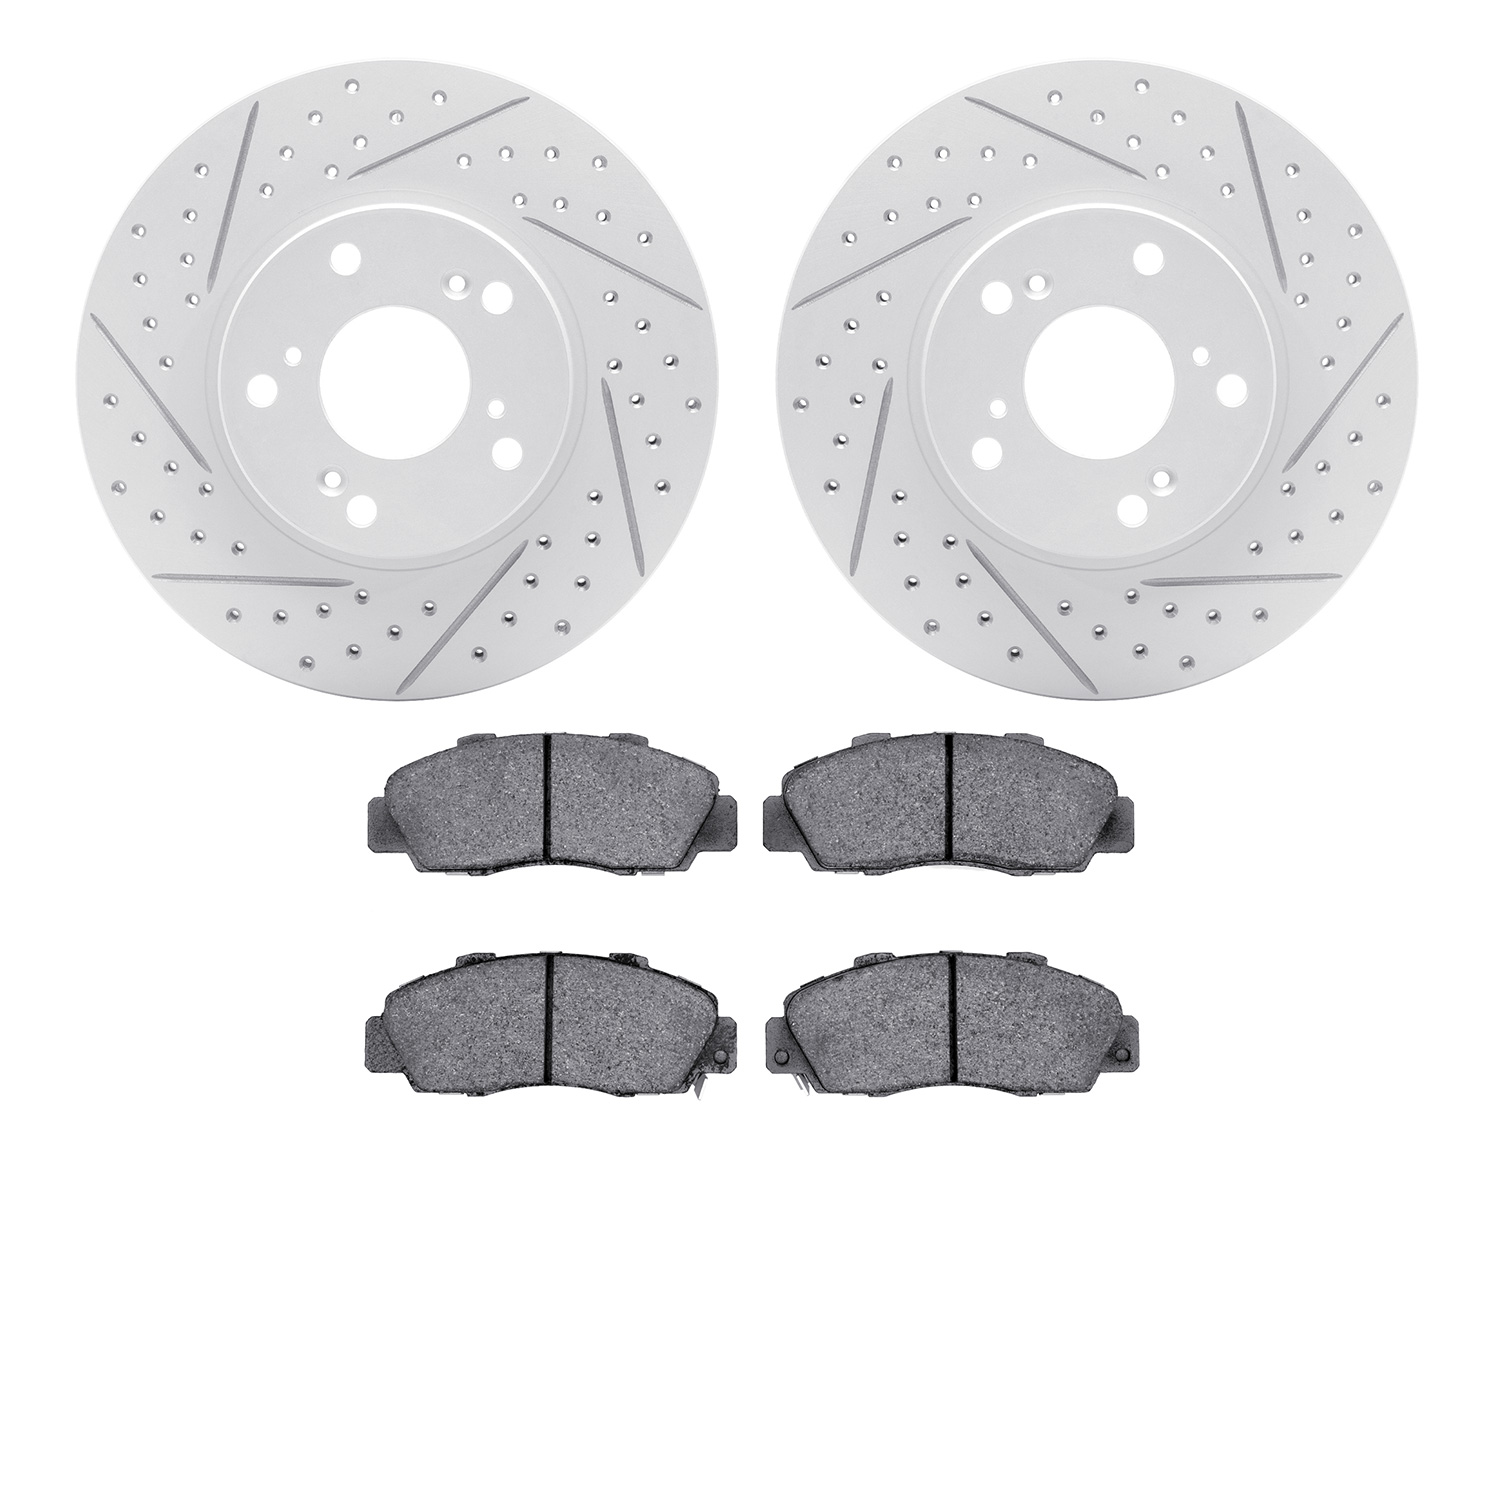 2502-59049 Geoperformance Drilled/Slotted Rotors w/5000 Advanced Brake Pads Kit, 1998-2002 Acura/Honda, Position: Front